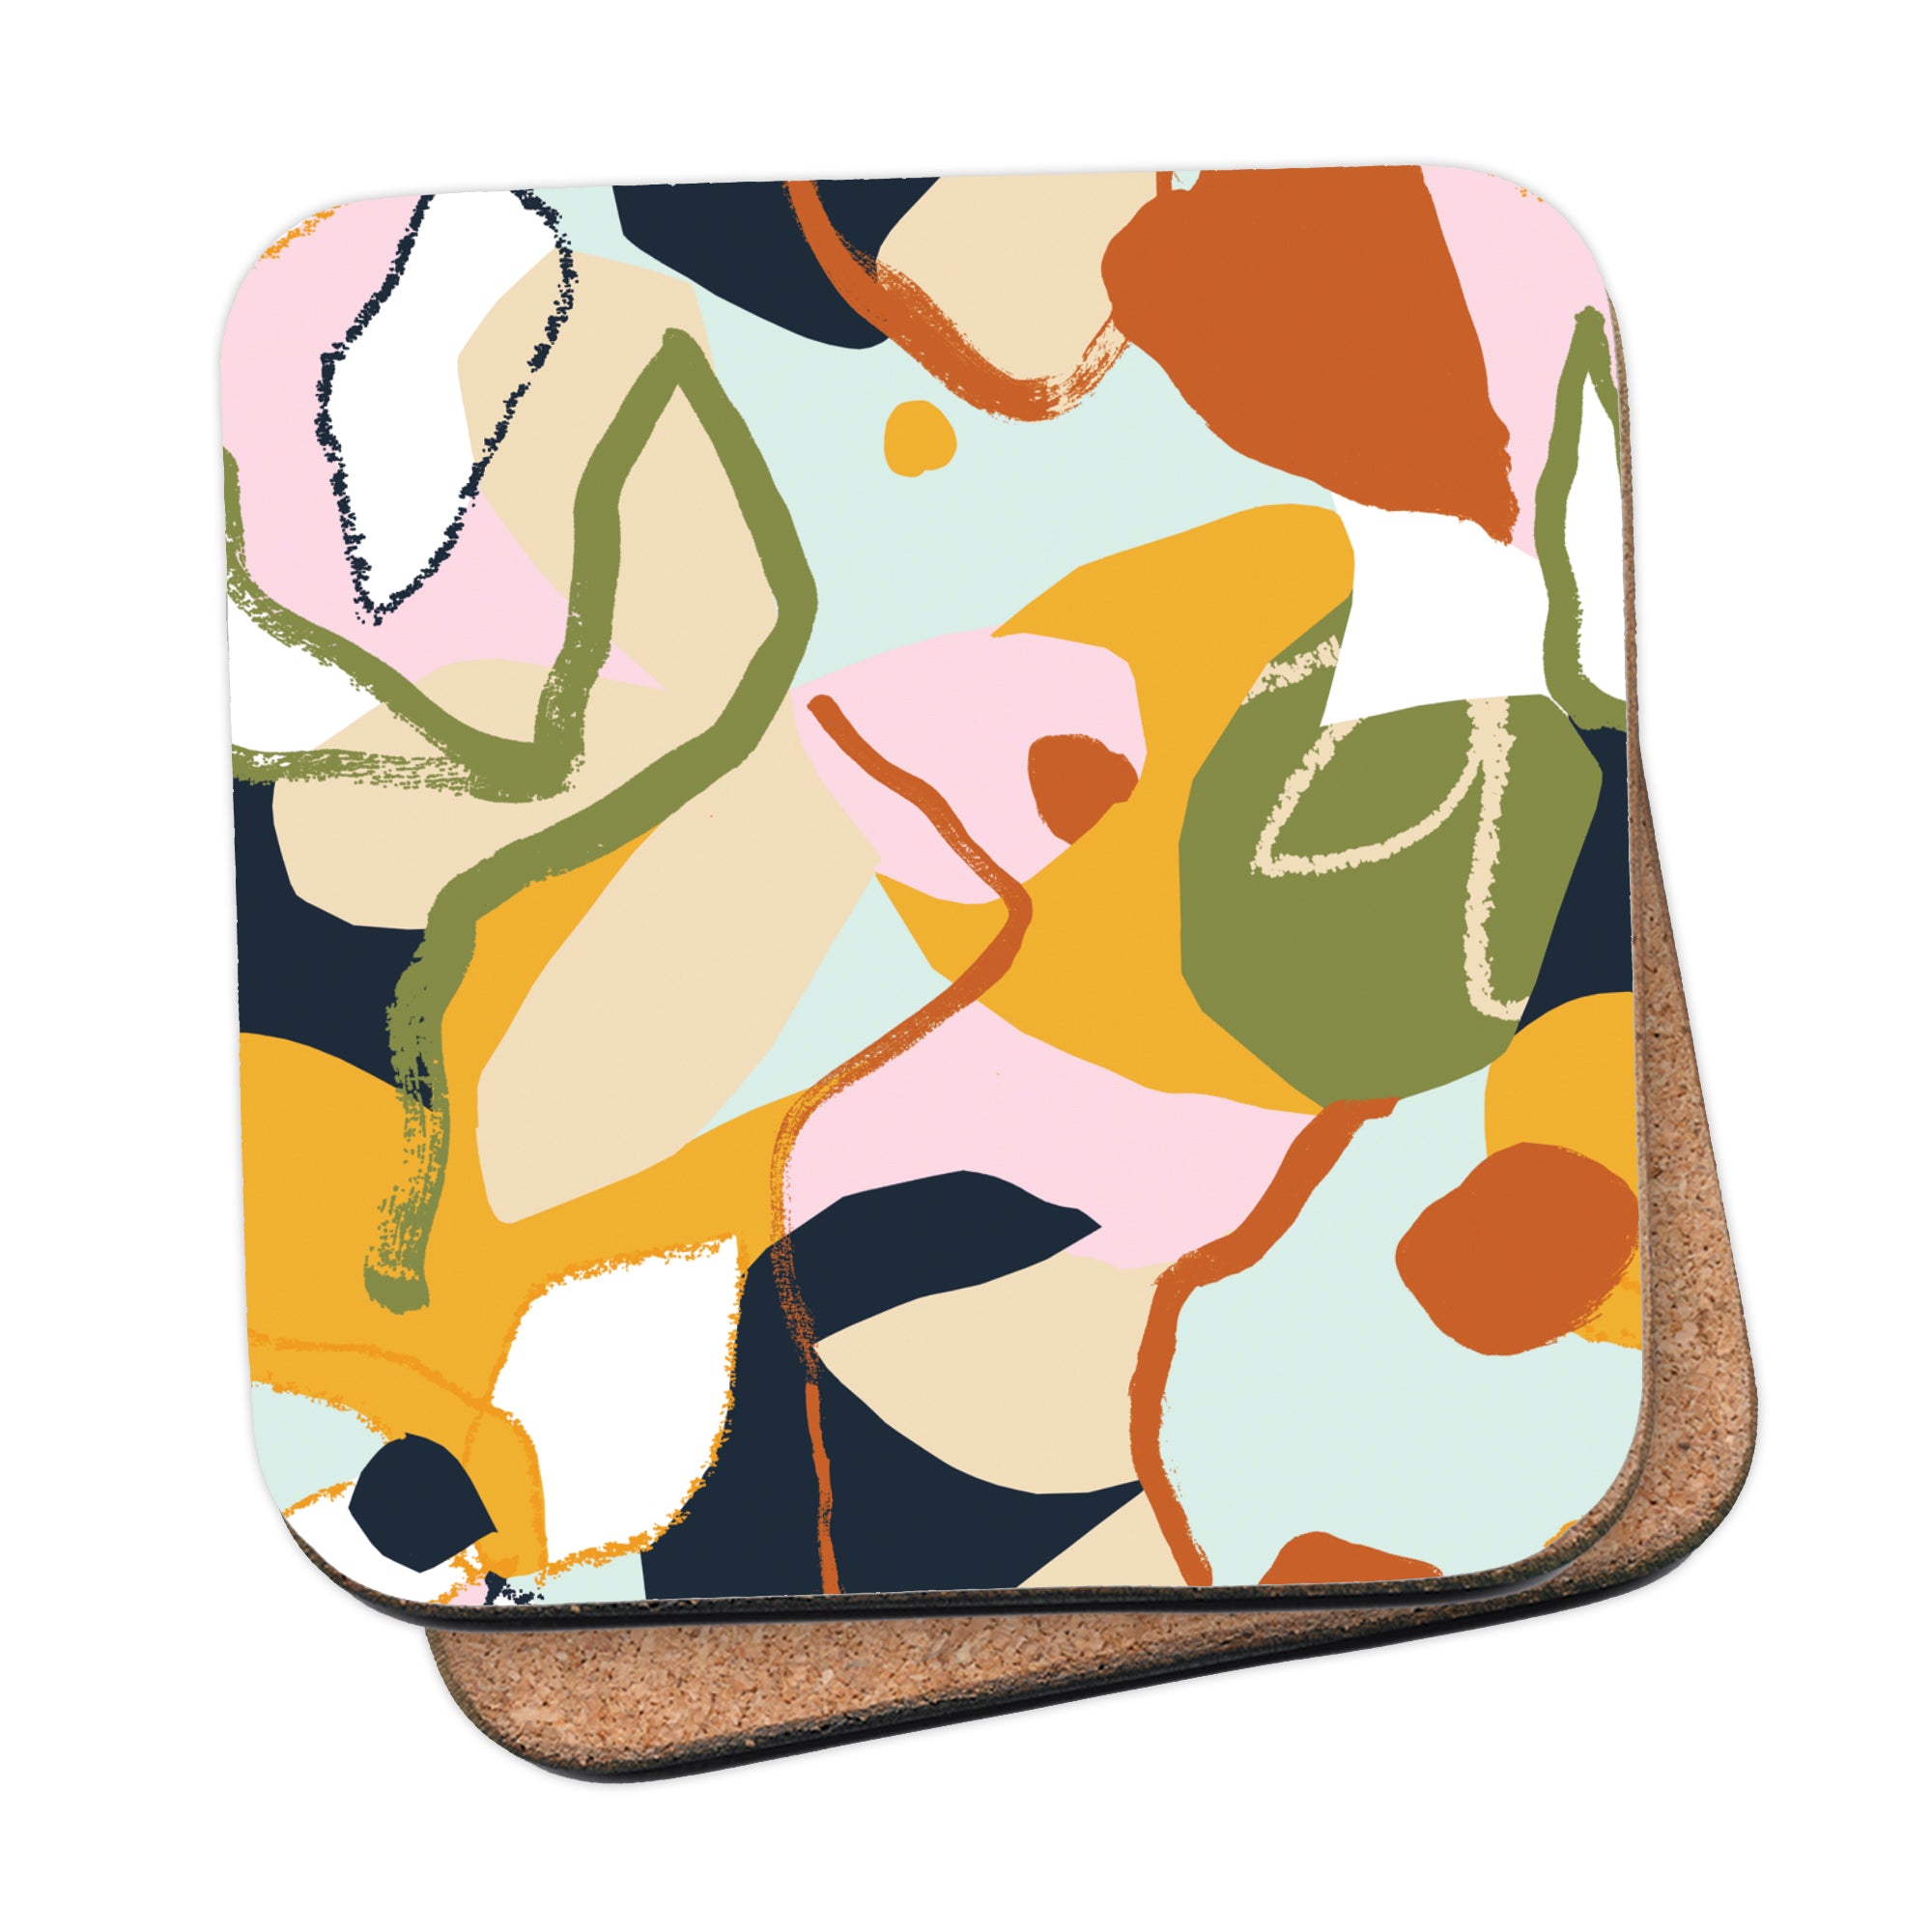 Lily Windsor Walker Exclusive Abstract Print Drinks Coaster